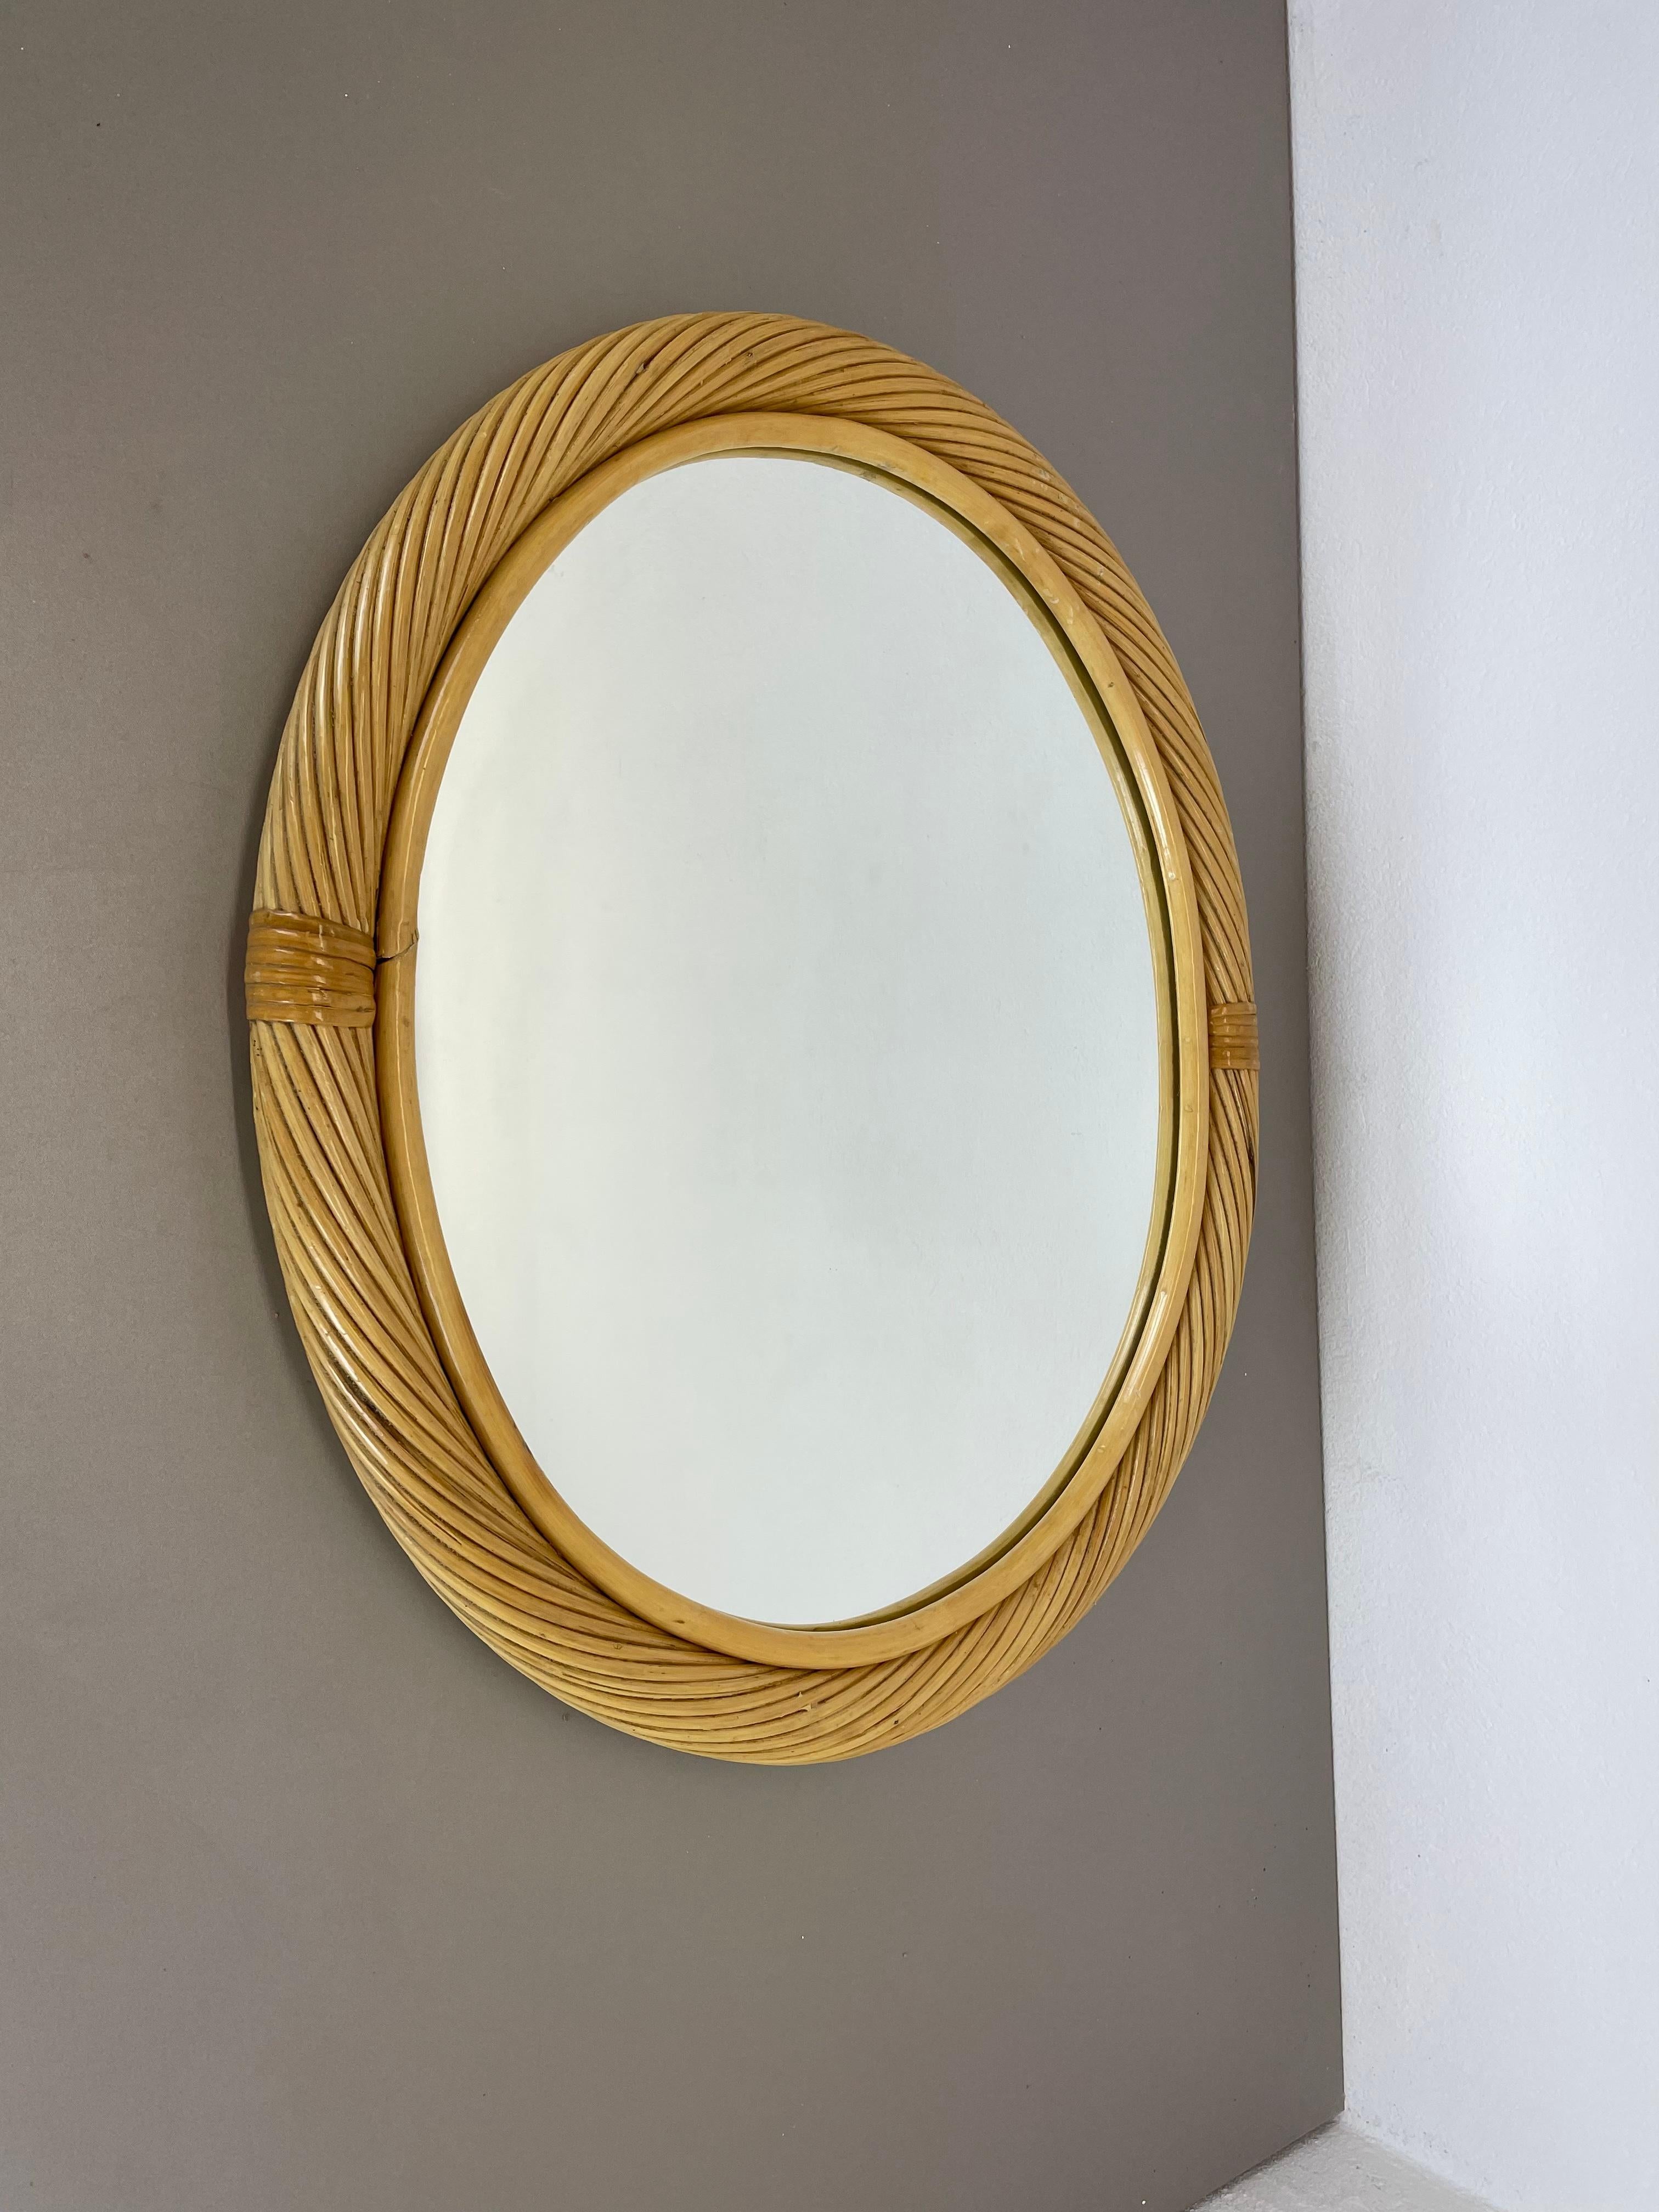 Article:

mirror


Origin:

Italy


Design:

In style of Franco Albini and Gabriella Crespi



Age:

1970s


Description:

This original vintage mirror was designed and produced in the 1970s by in Italy. the mirror glass is